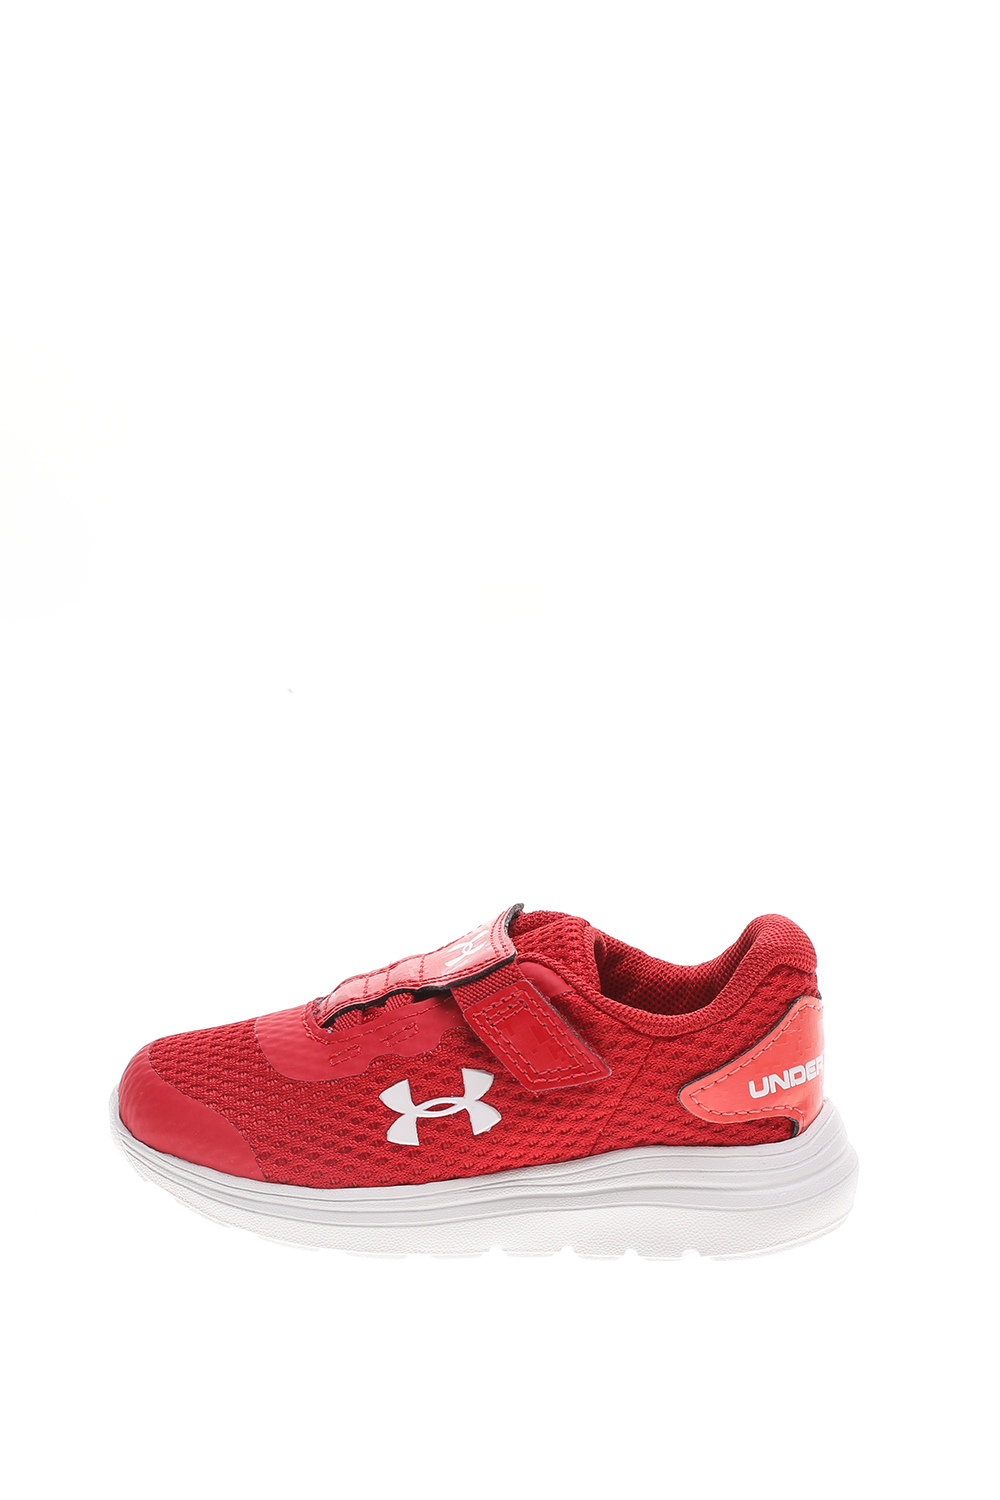 UNDER ARMOUR – Παιδικά αθλητικά παπούτσια UNDER ARMOUR Inf Surge 2 AC κόκκινα 1802174.0-4091